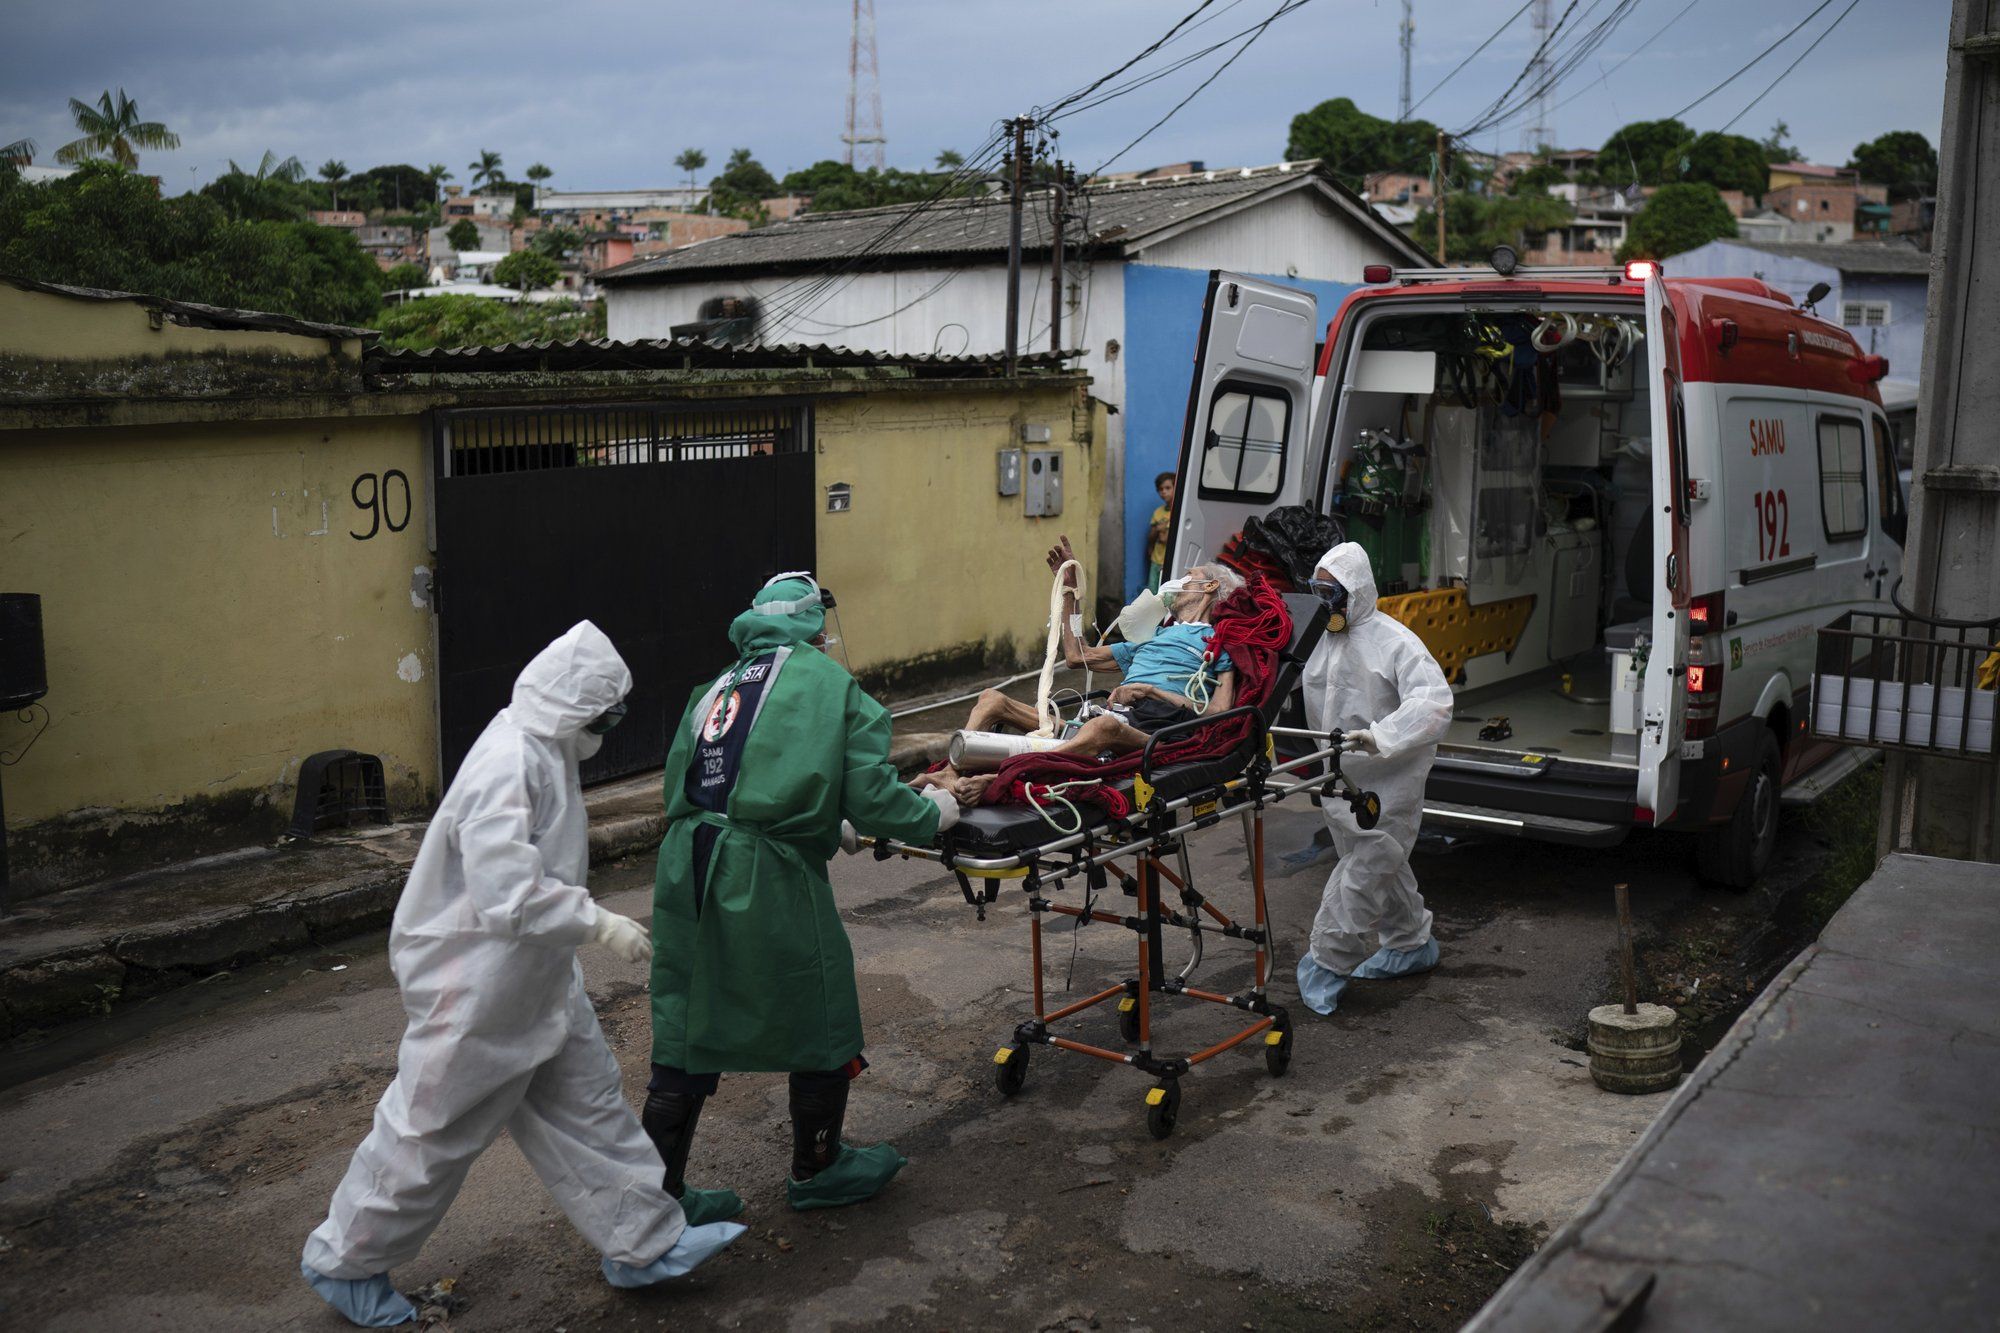 Emergency workers transfer an elderly patient, suspected of having COVID-19, to a hospital in Manaus, Brazil, Wednesday, May 13, 2020. Image by Felipe Dana / AP Photo. Brazil, 2020.